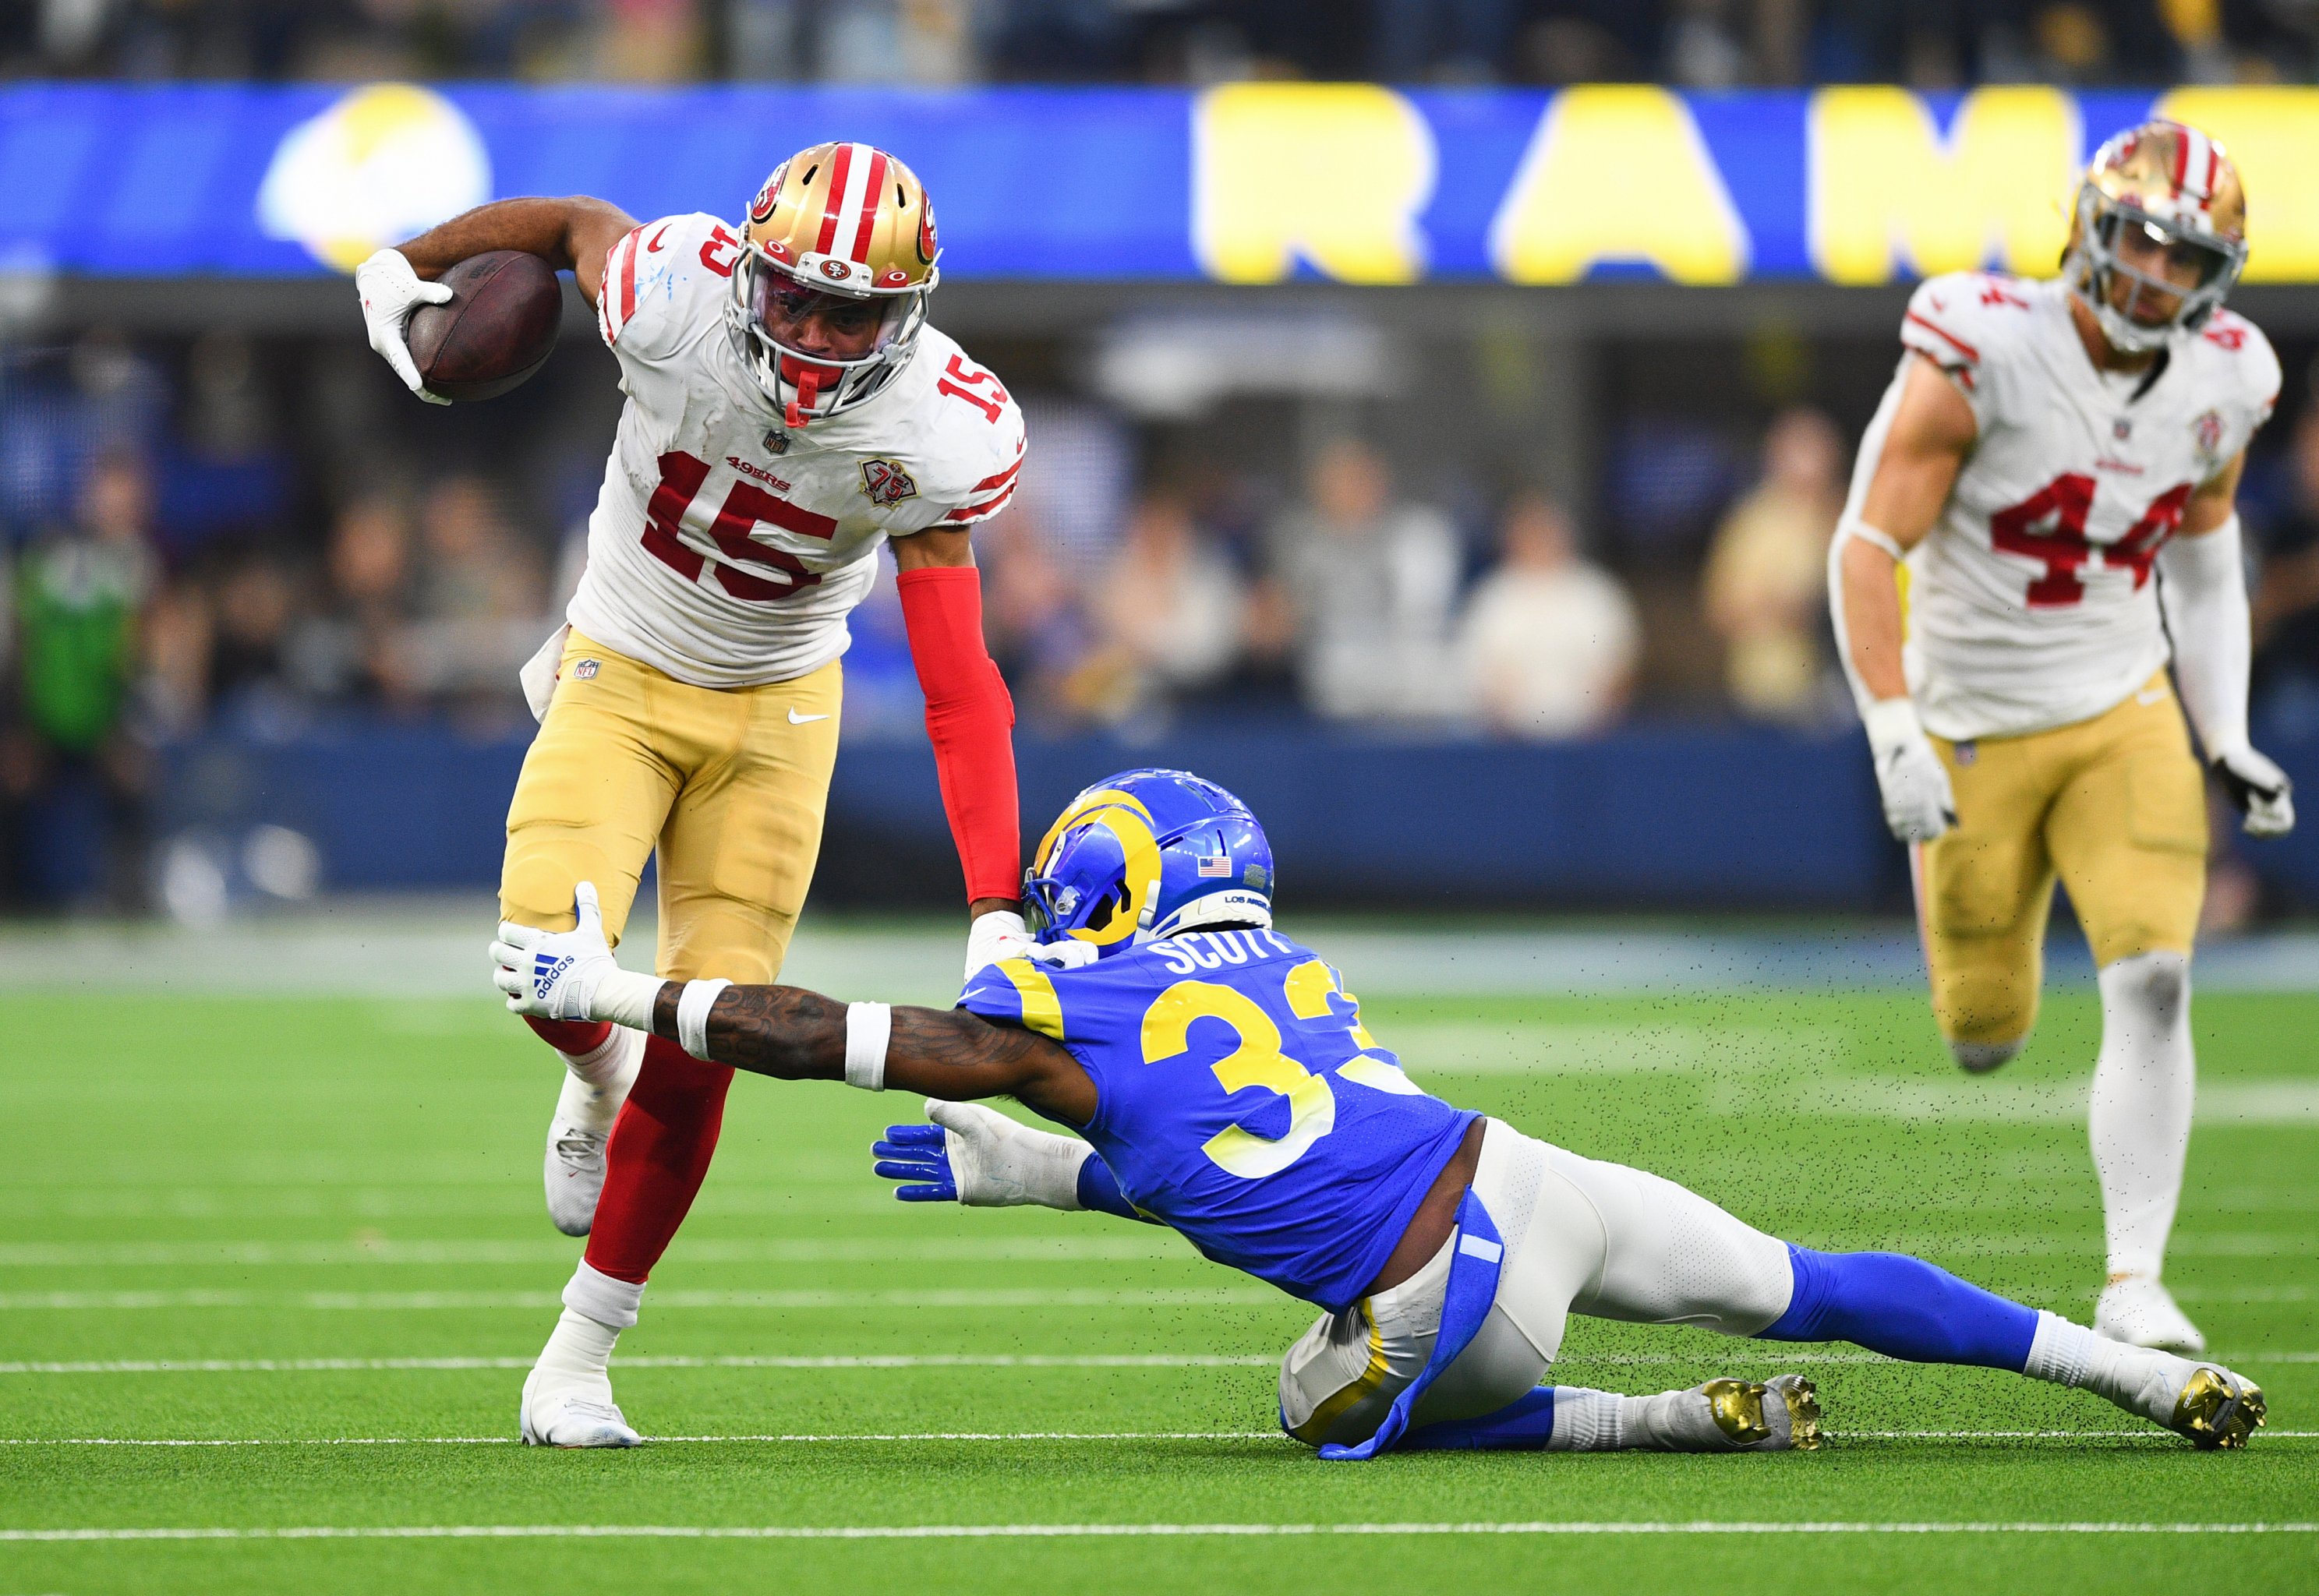 2022 NFC Championship Game preview: 49ers look to stifle high